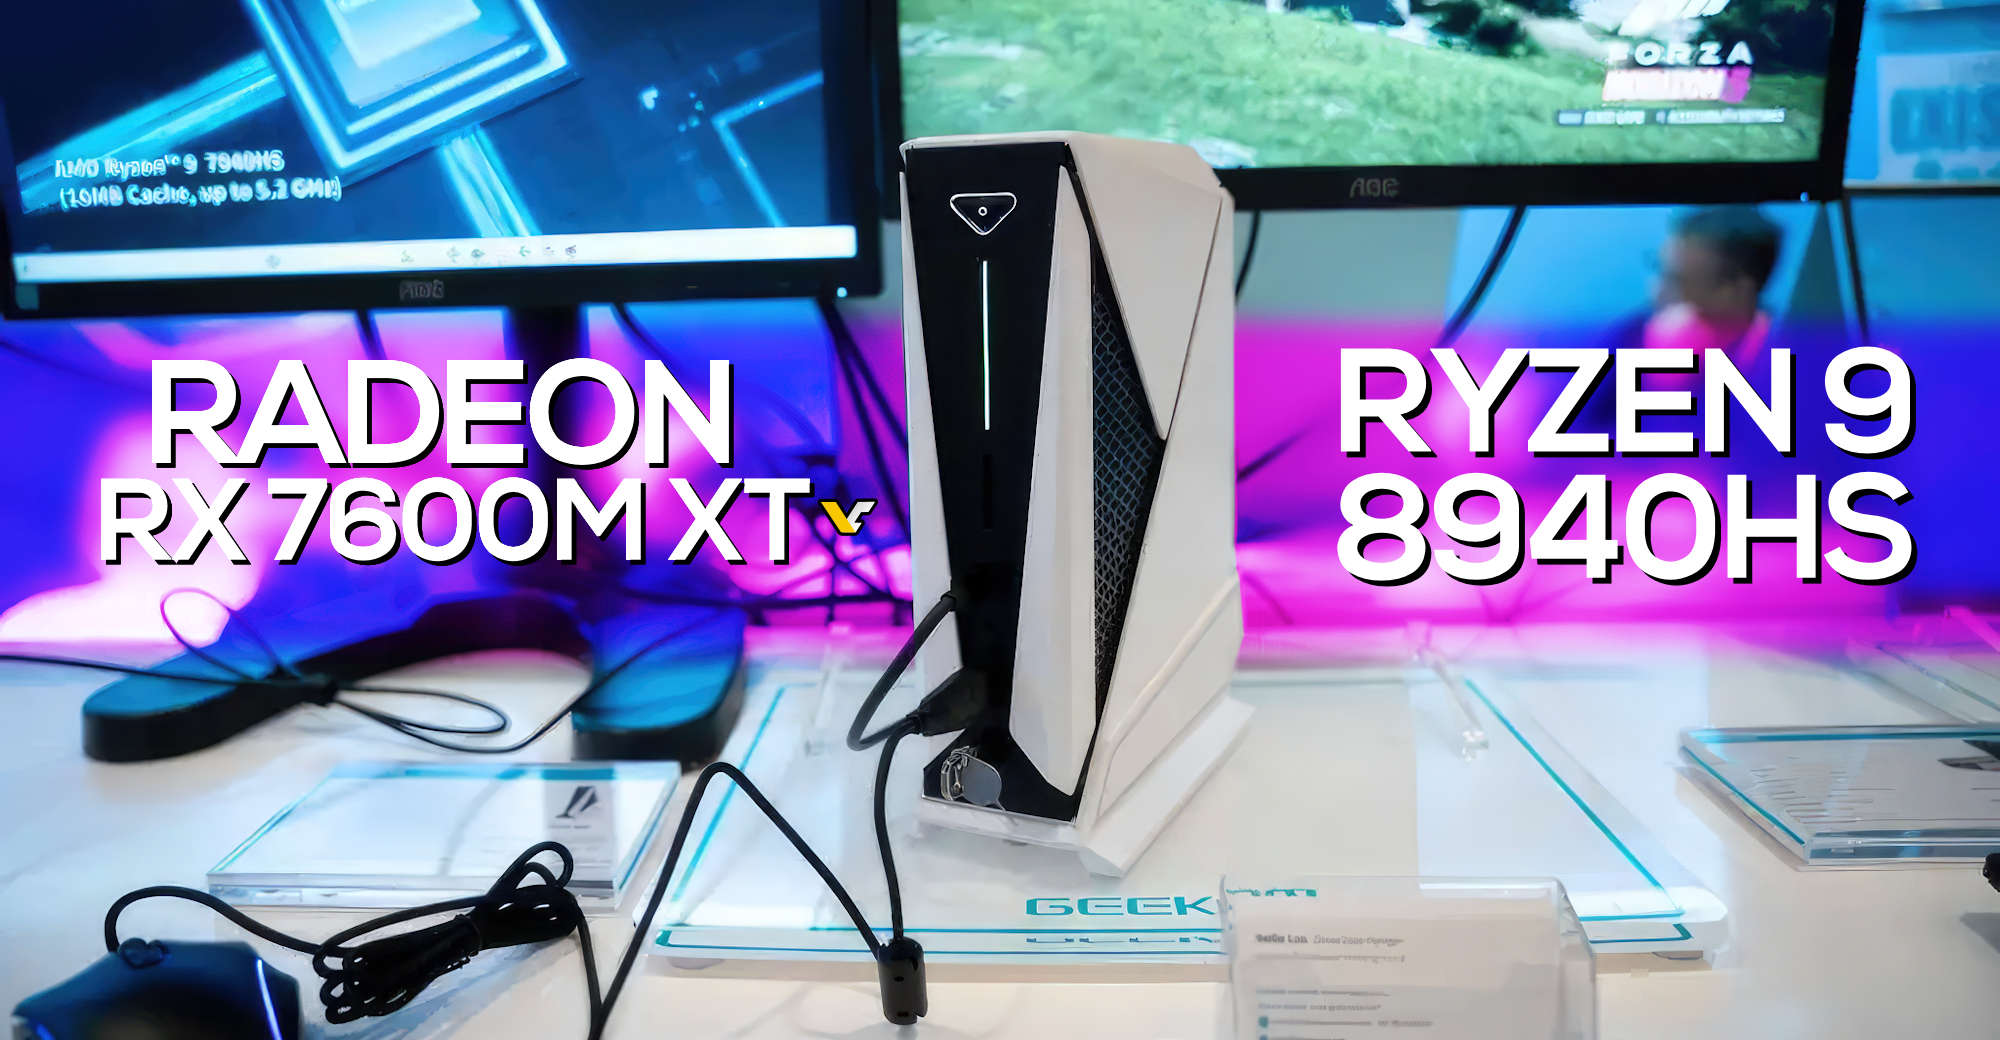 Geekom details its gaming Mini-PC with Ryzen 8940HS and Radeon RX 7600M XT  